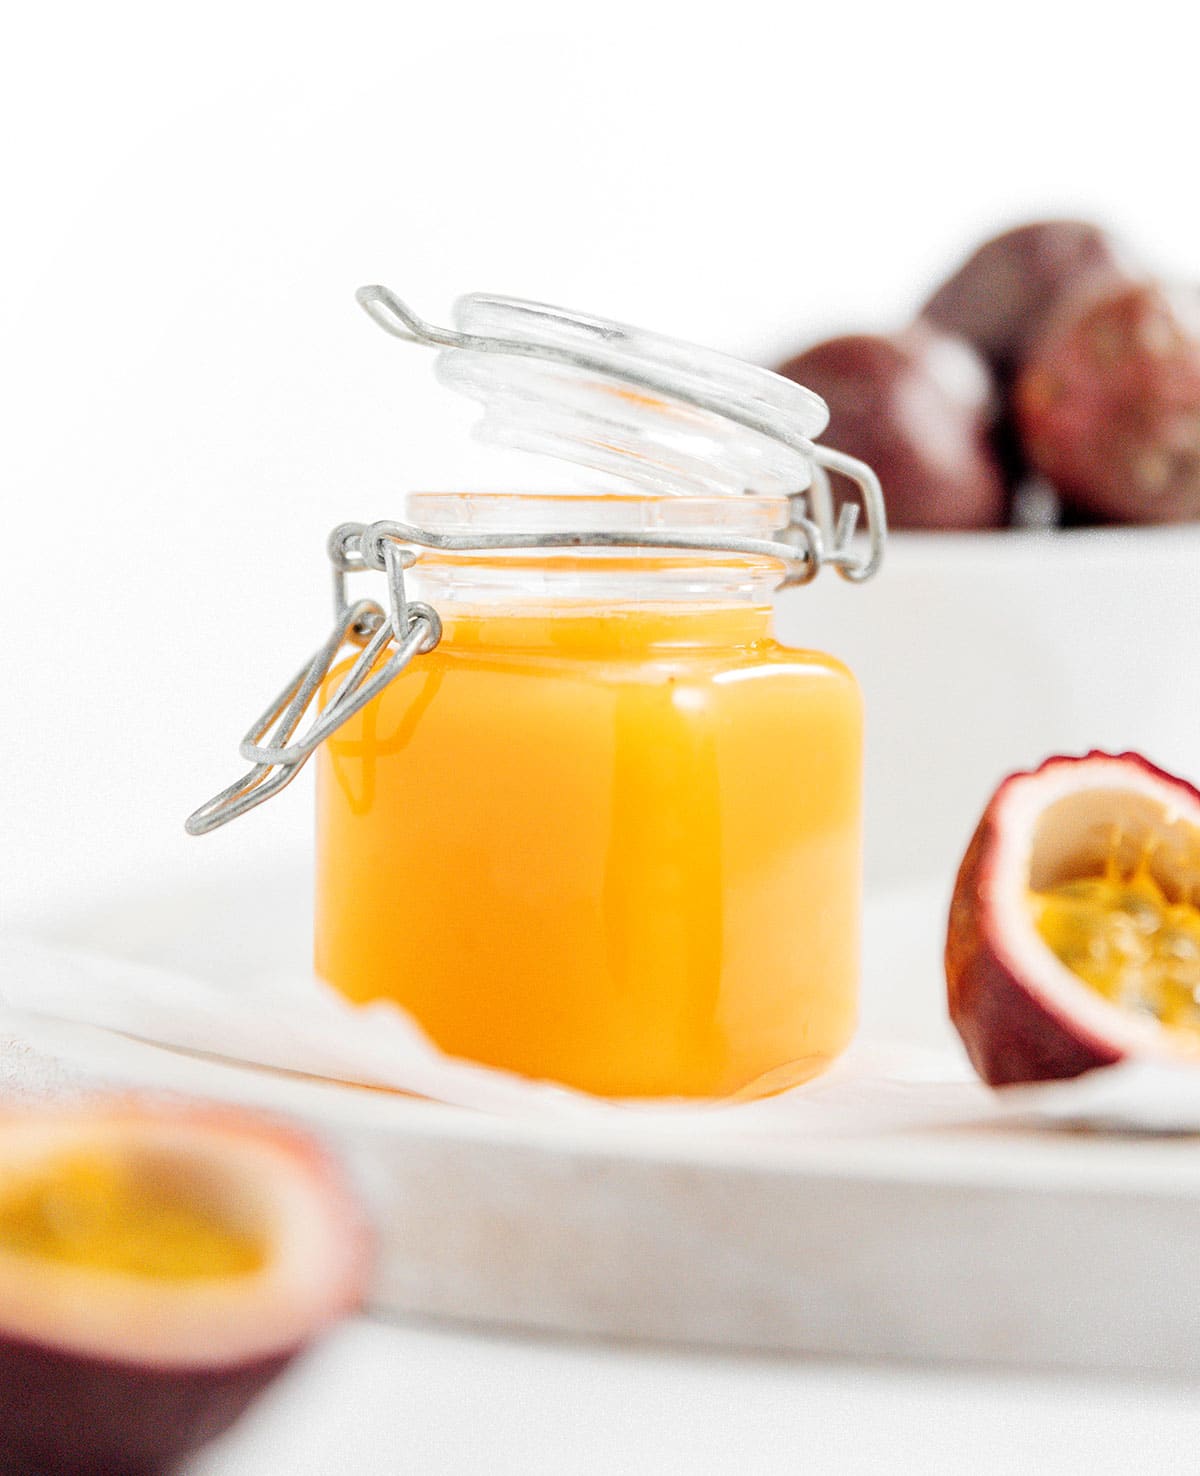 A cut open passion fruit next to a small jar of passion fruit puree.